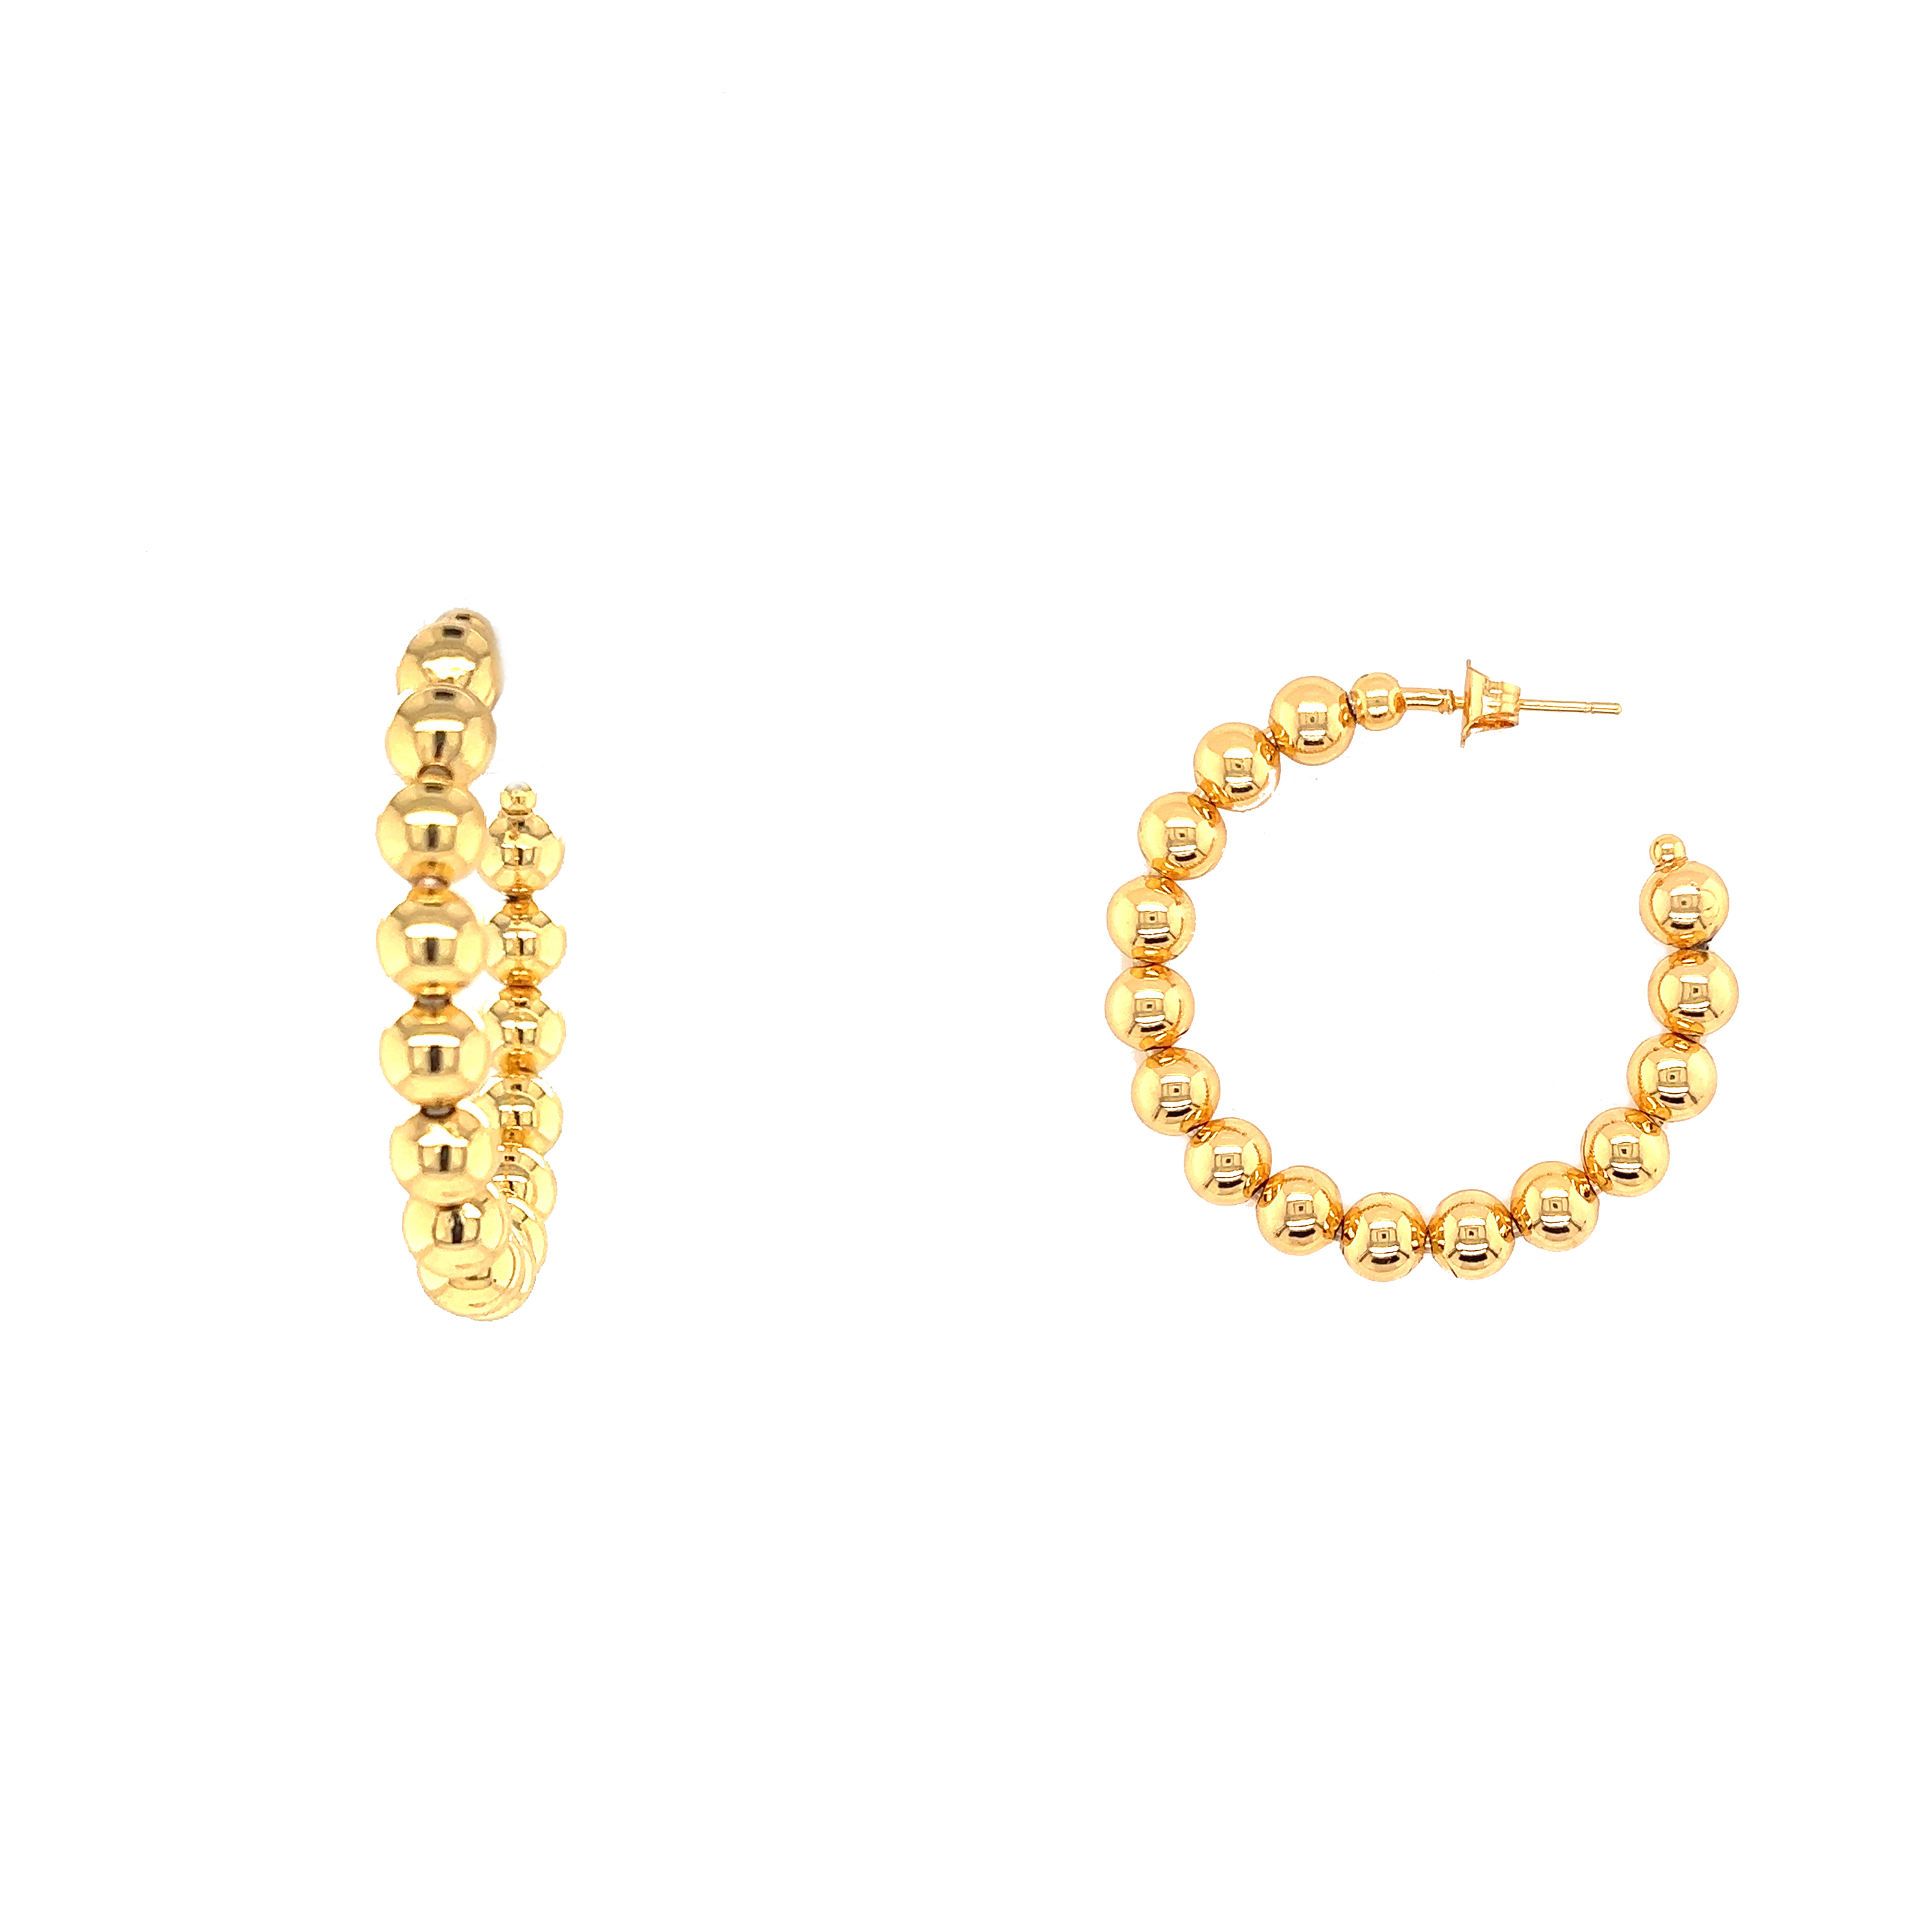 6mm x 40mm Gold Filled Beaded Hoops